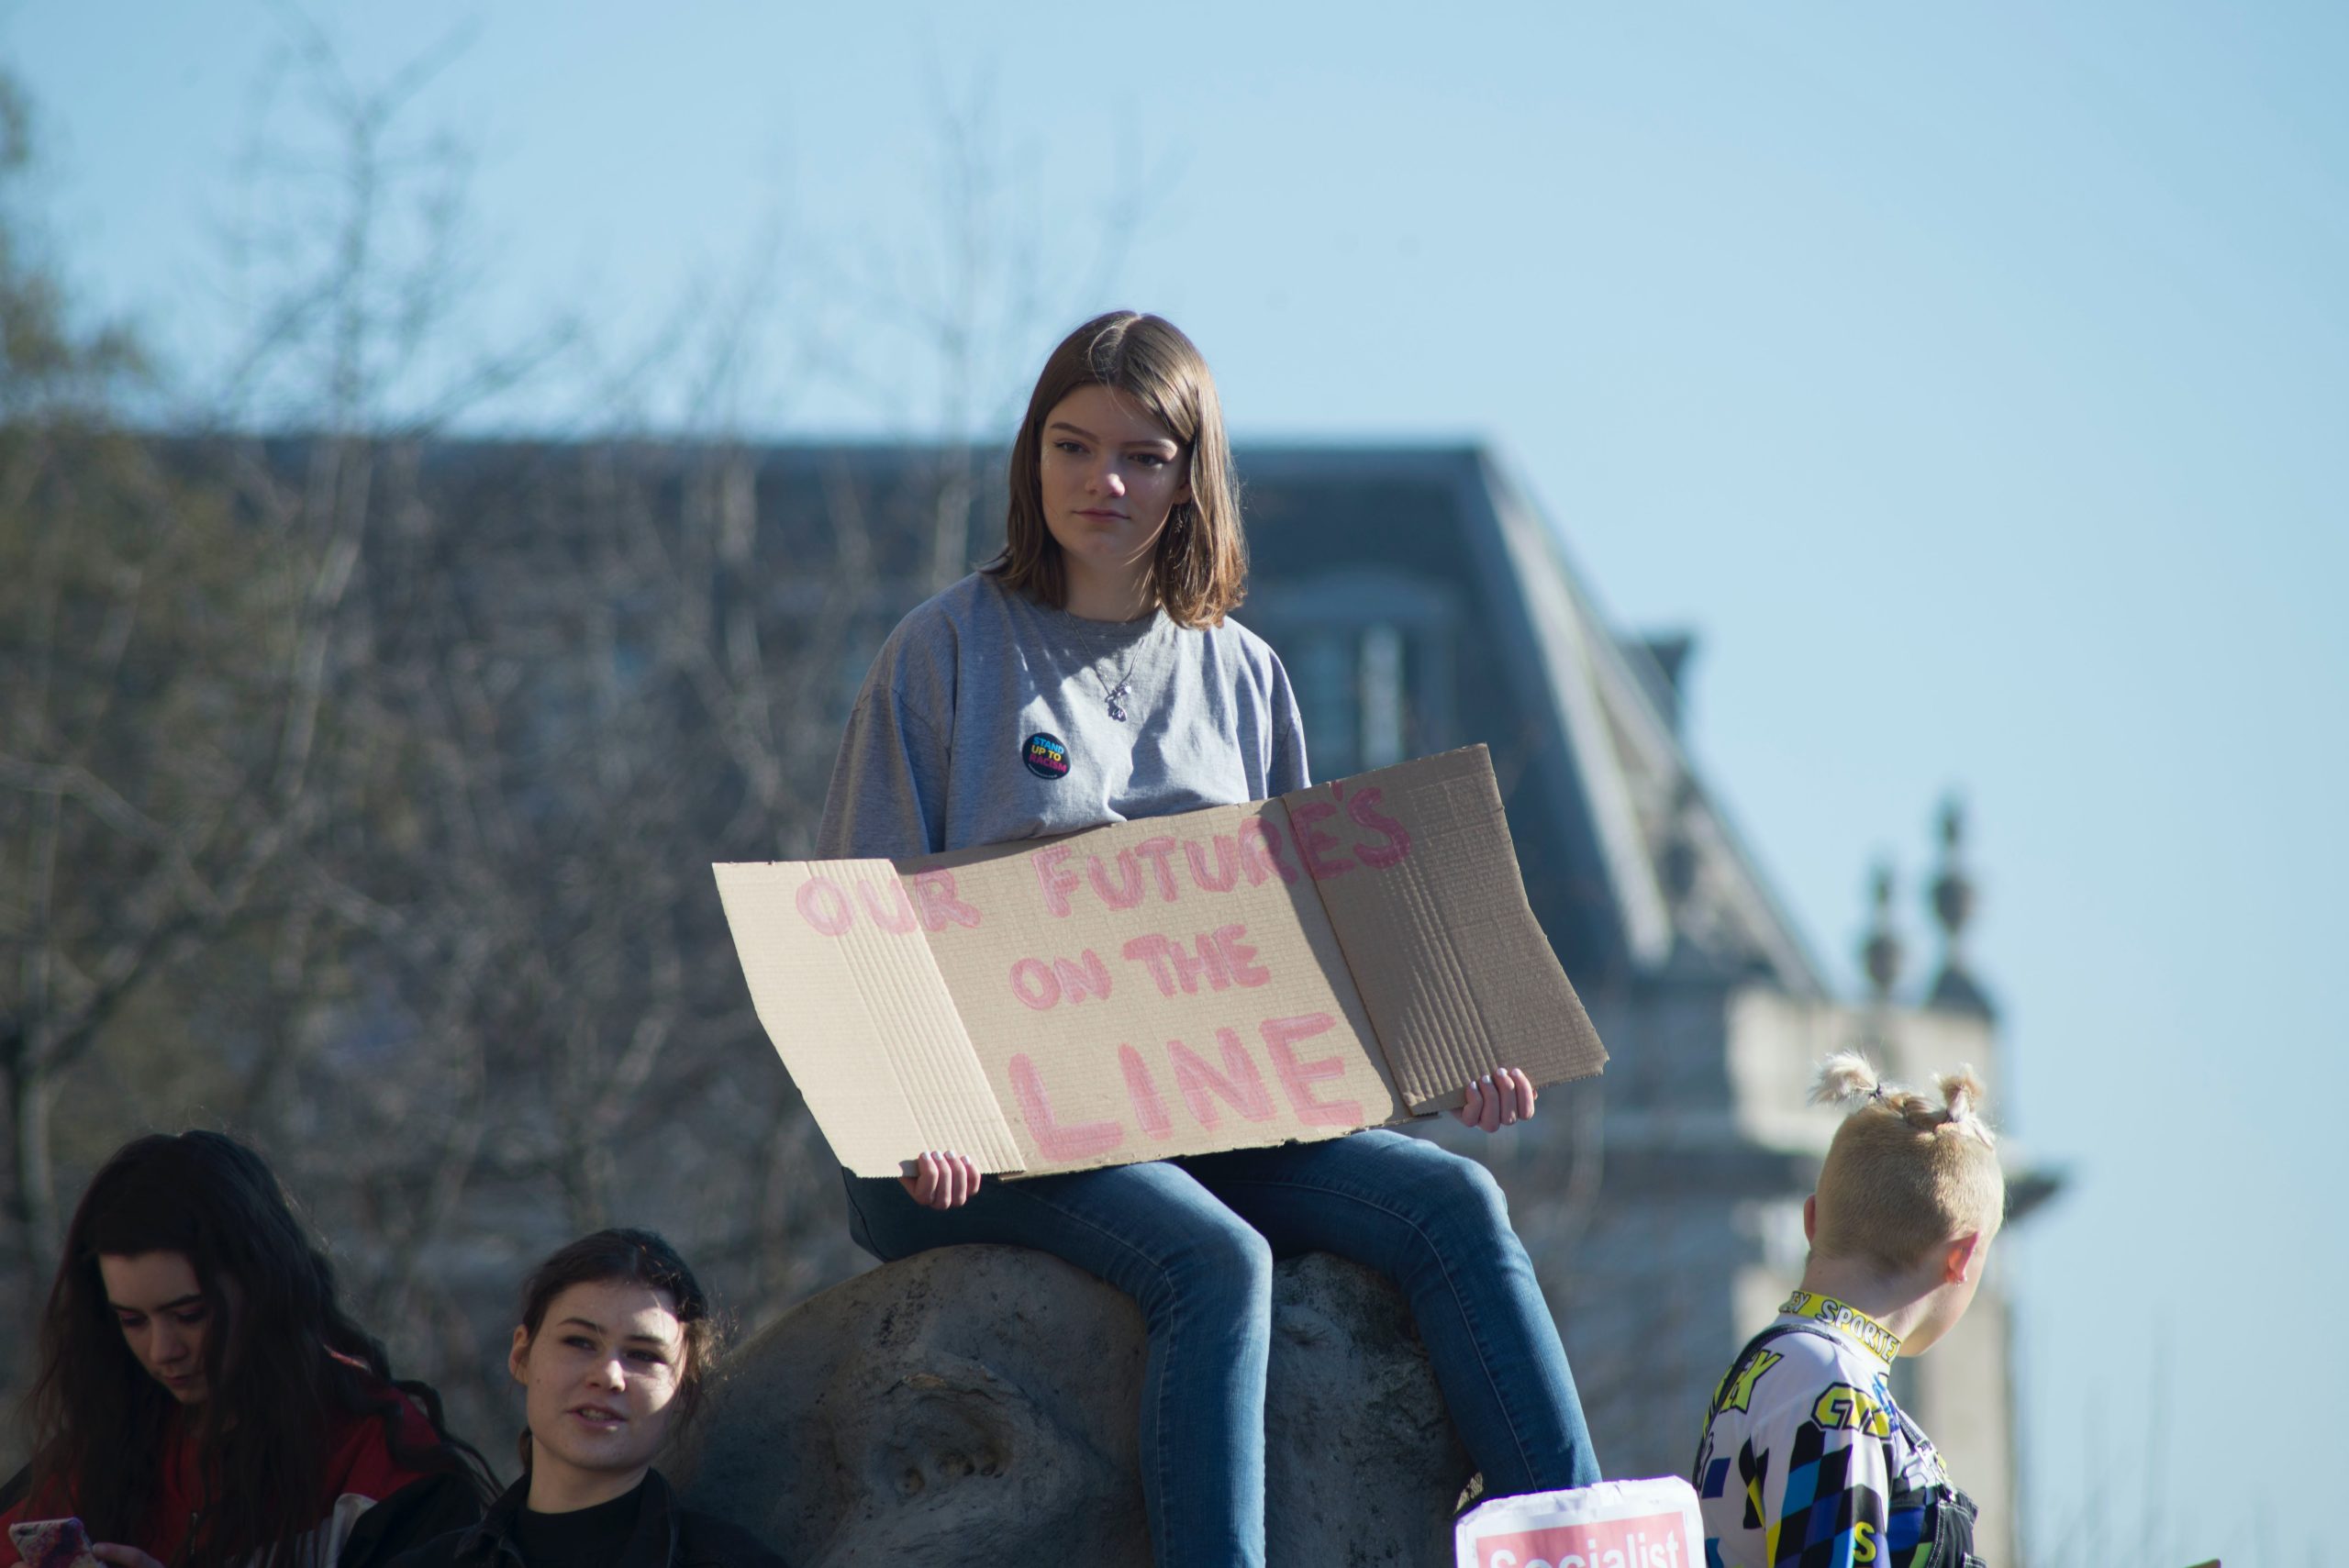 Teen girl attends environmental protest and holds sign reading Our Future's on the Line